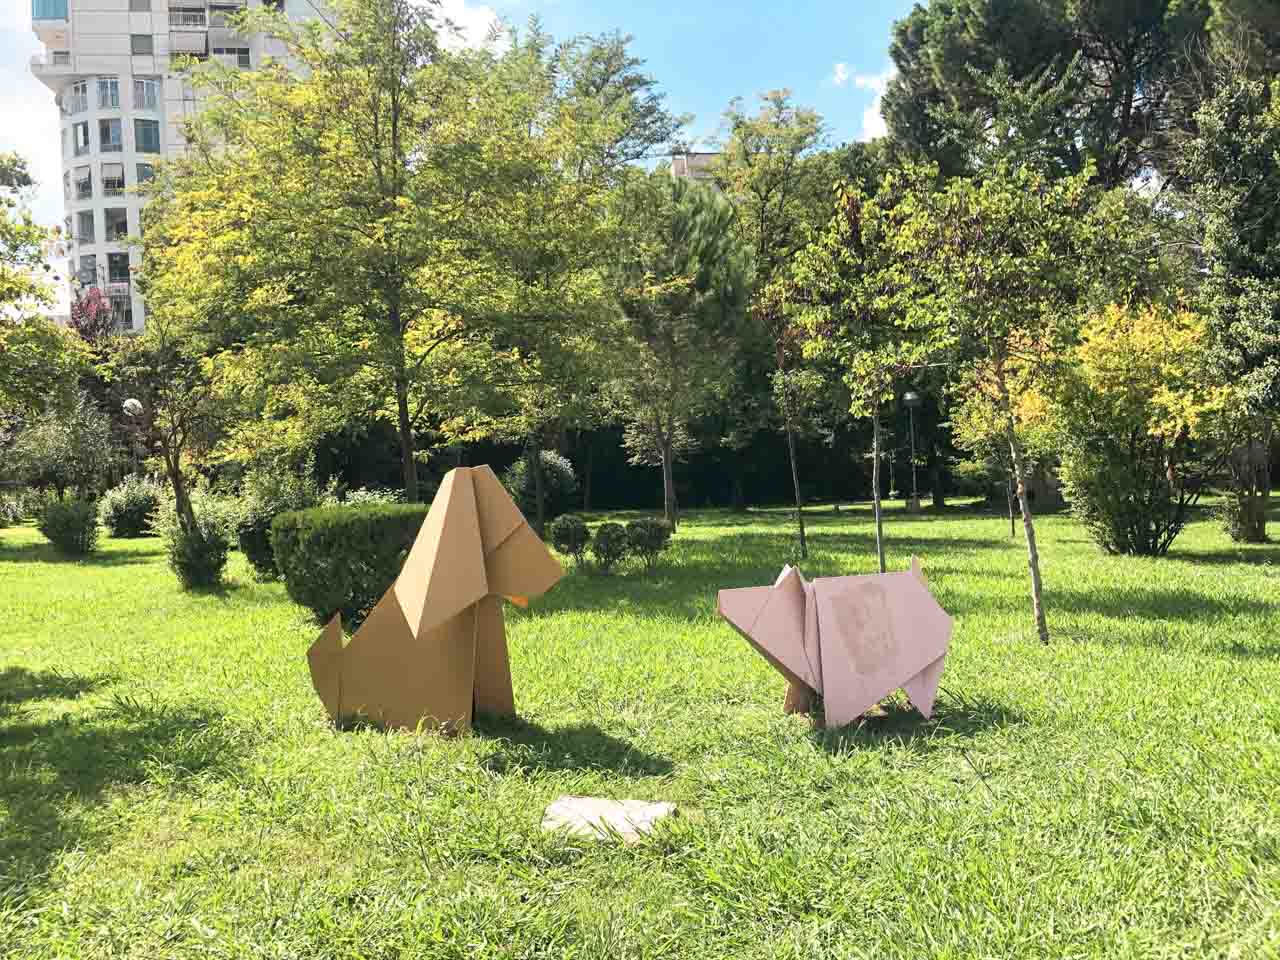 Two animal sculptures in a park in Tirana, Albania